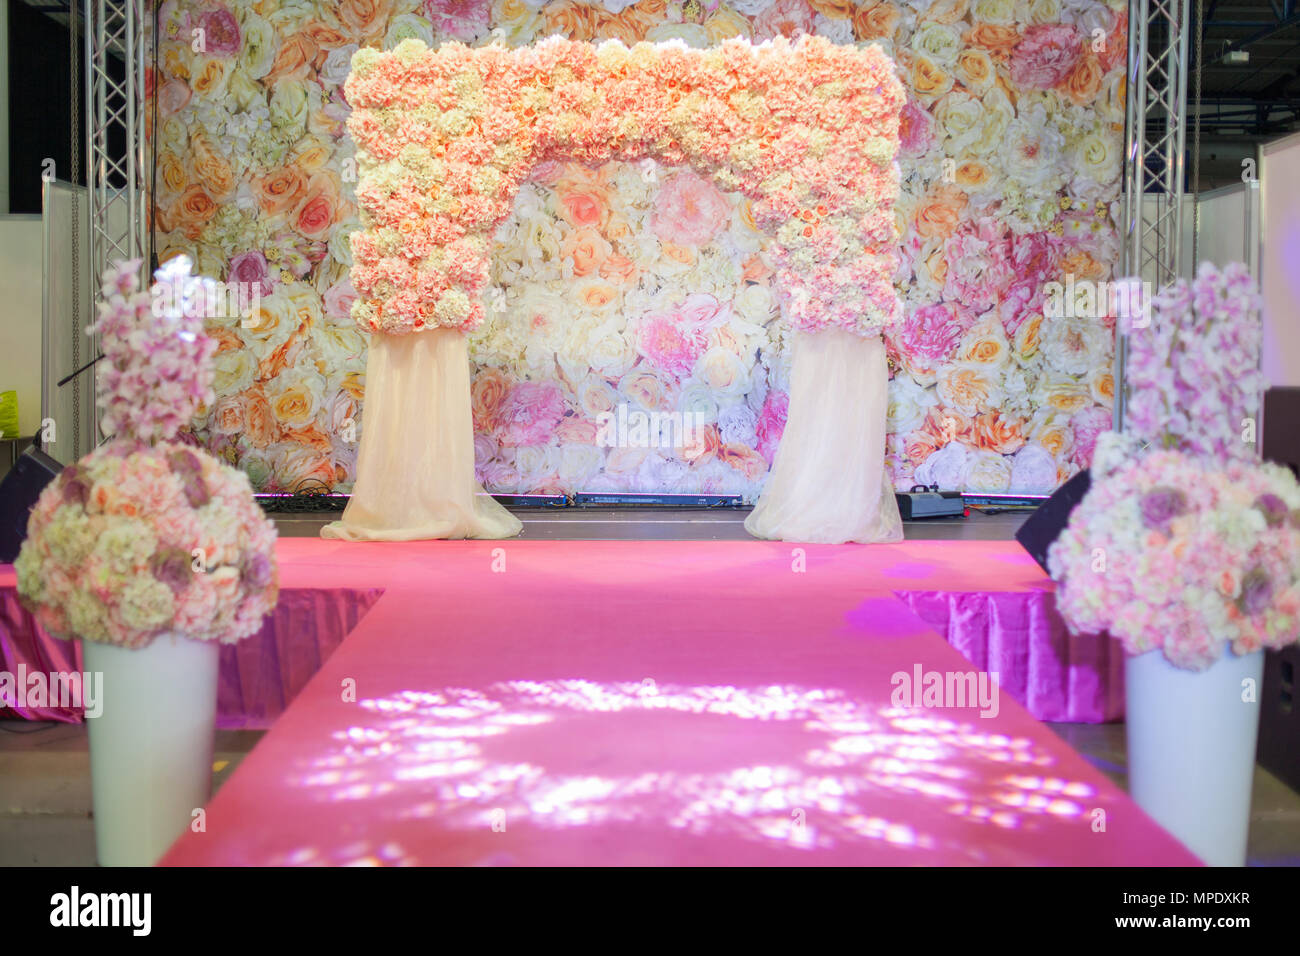 Wedding arch on the podium. Vases with flowers stand along the catwalk. Stock Photo